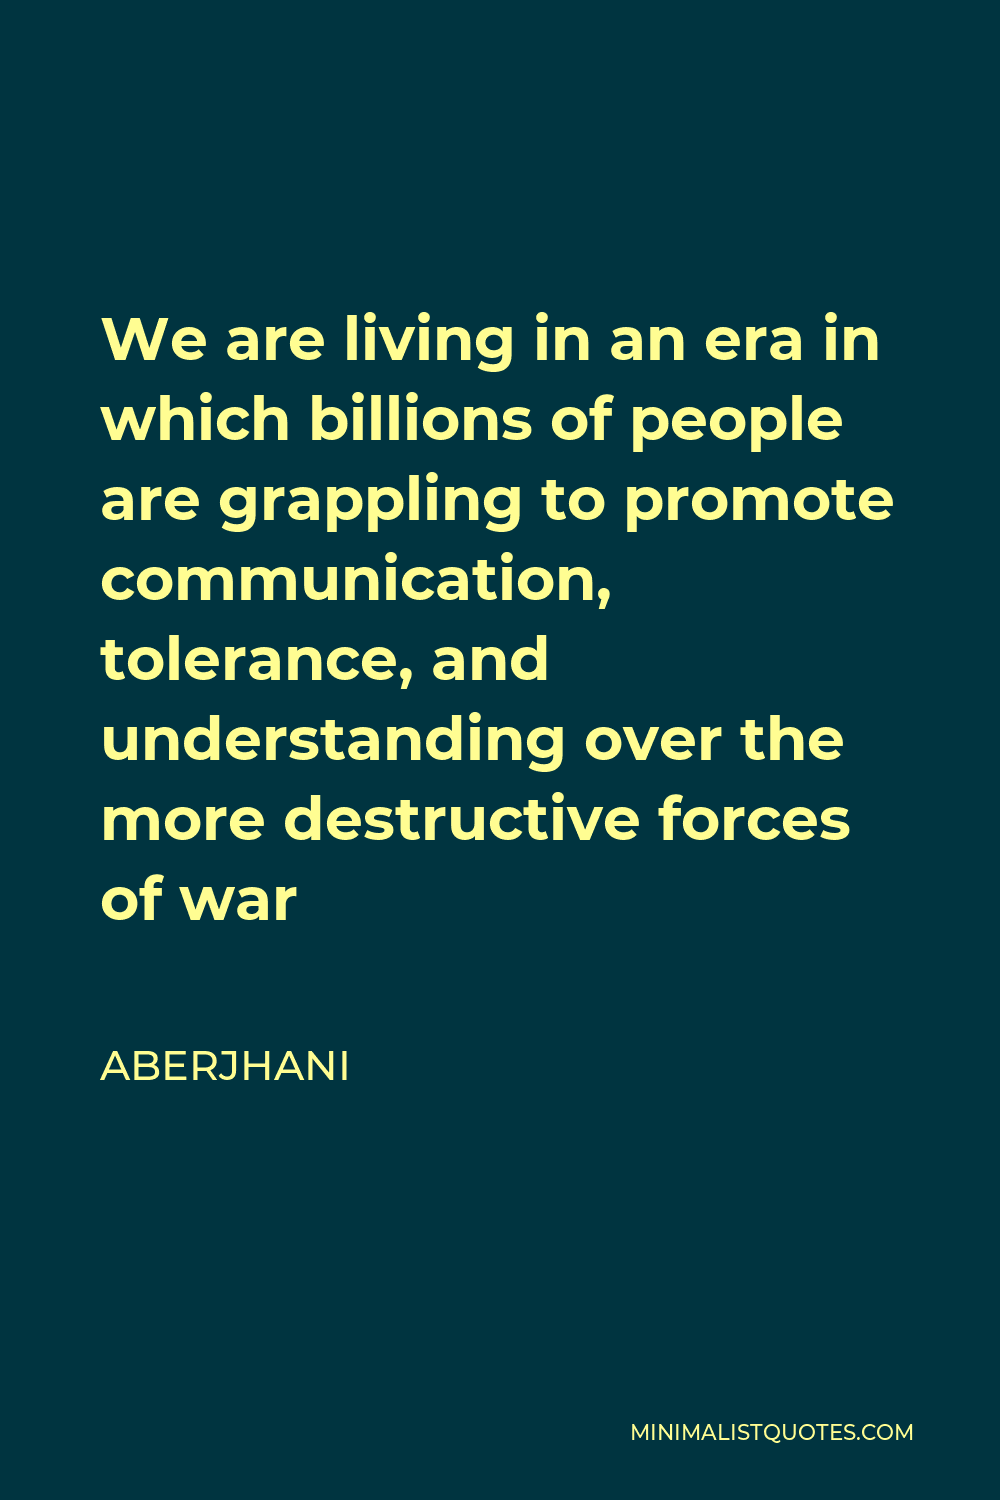 Aberjhani Quote - We are living in an era in which billions of people are grappling to promote communication, tolerance, and understanding over the more destructive forces of war